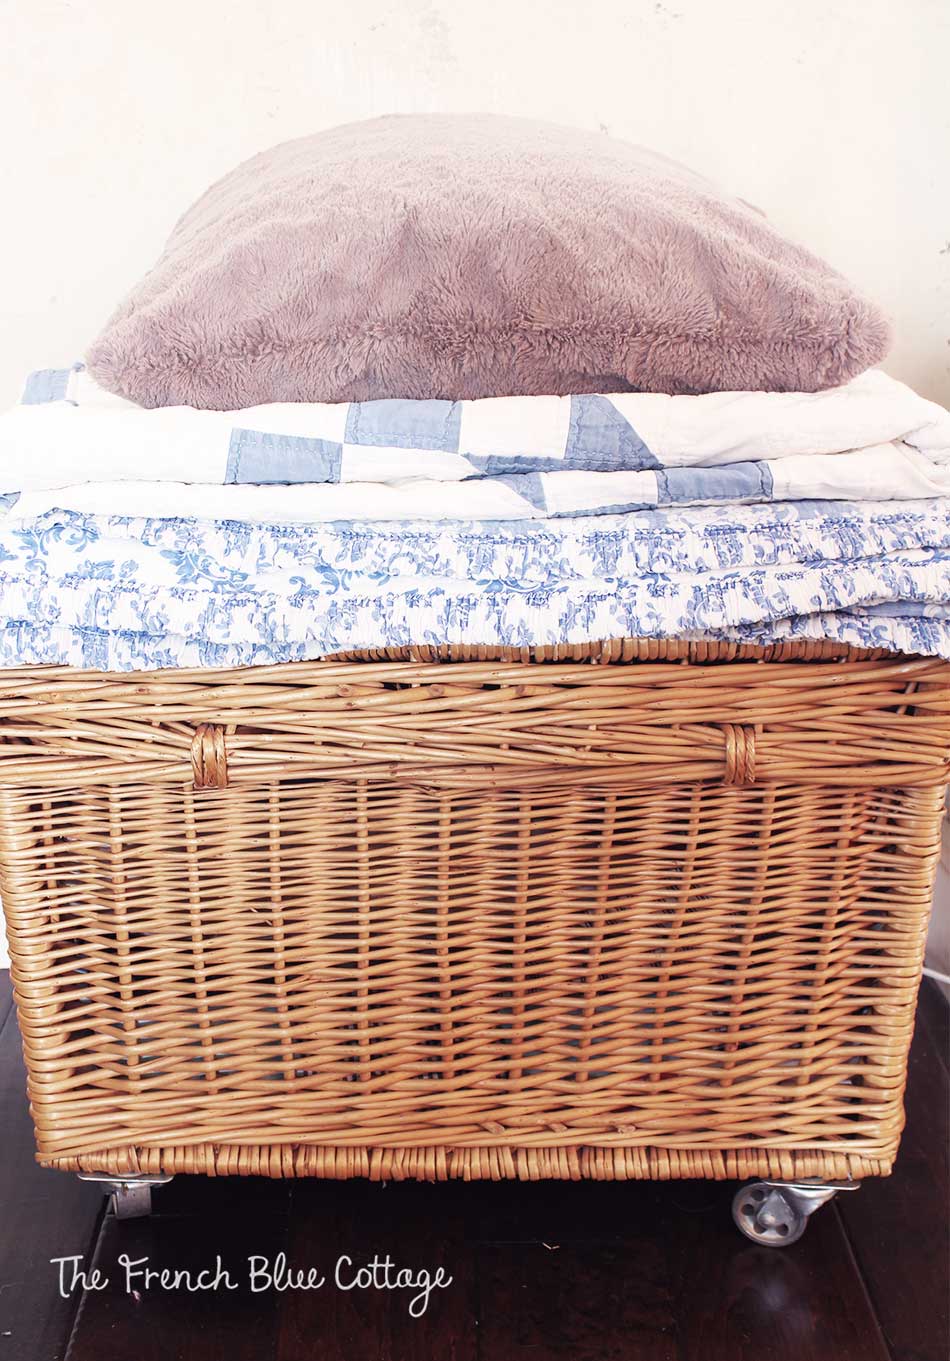 Cozy stack of blankets and quilts.